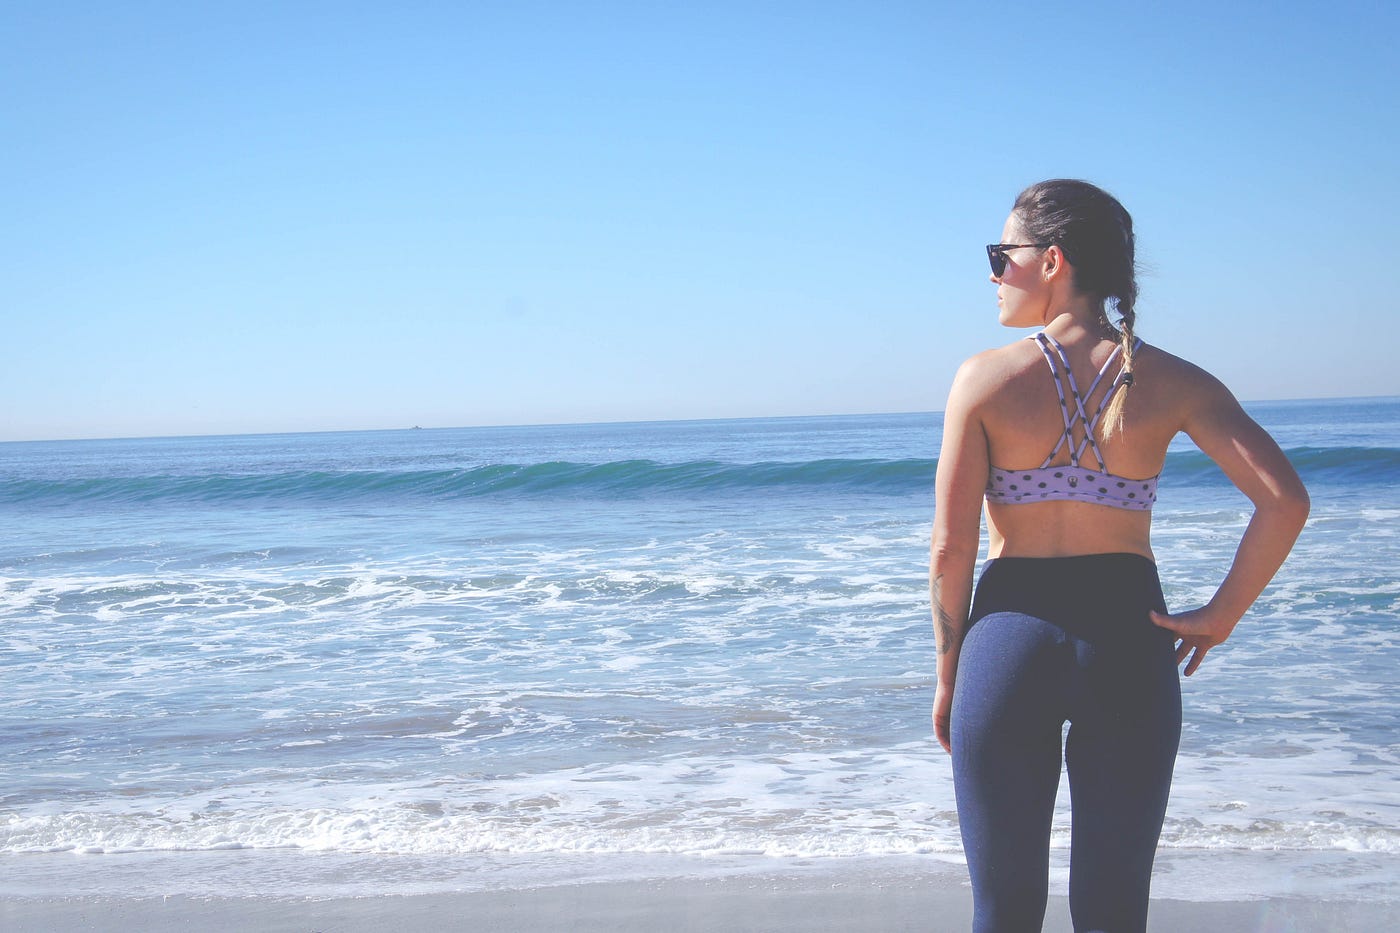 SO WHY WOULD YOU WANT TO WEAR YOGA PANTS MADE FROM RECYCLED PLASTIC (PET)?